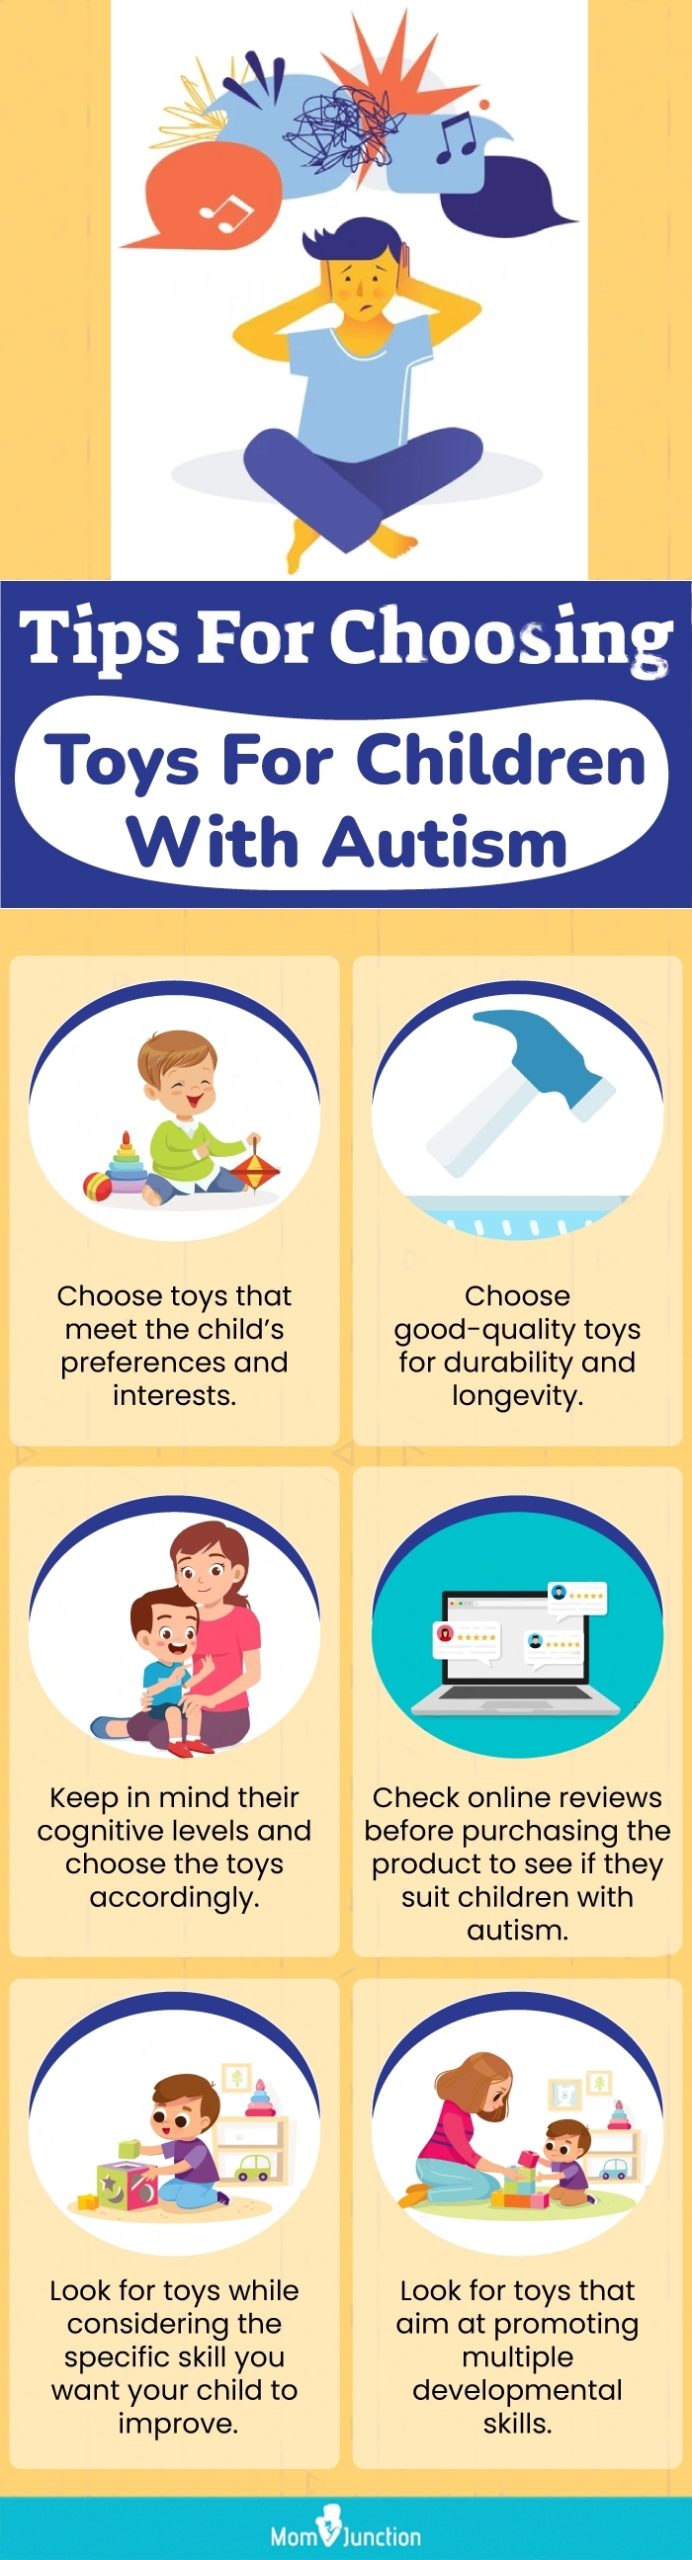 Tips For Choosing Toys For Children With Autism (infographic)